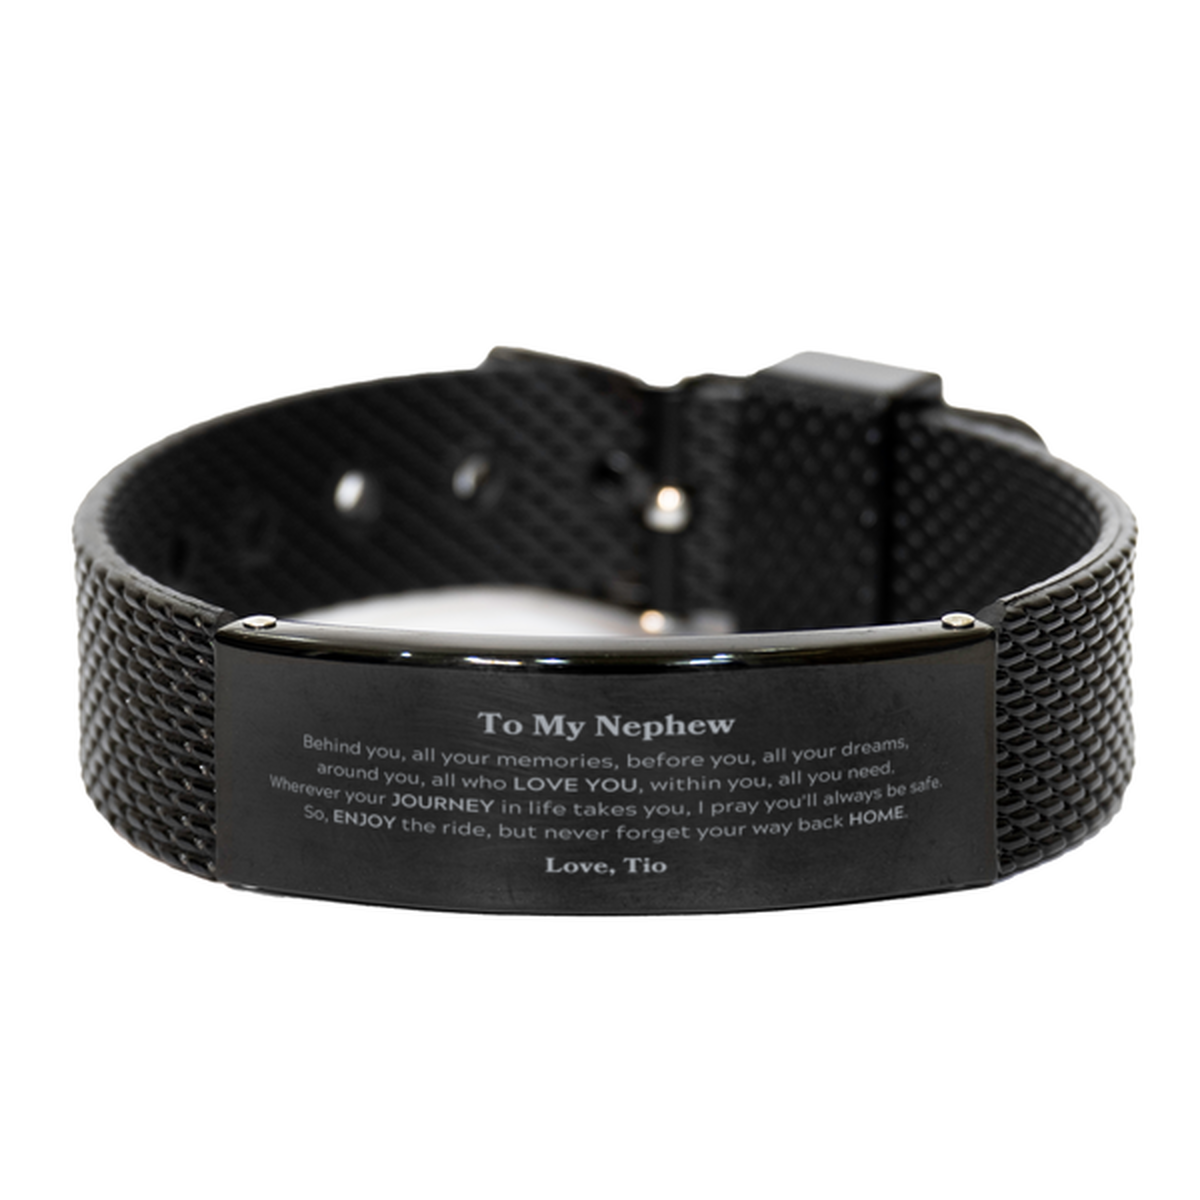 To My Nephew Graduation Gifts from Tio, Nephew Black Shark Mesh Bracelet Christmas Birthday Gifts for Nephew Behind you, all your memories, before you, all your dreams. Love, Tio